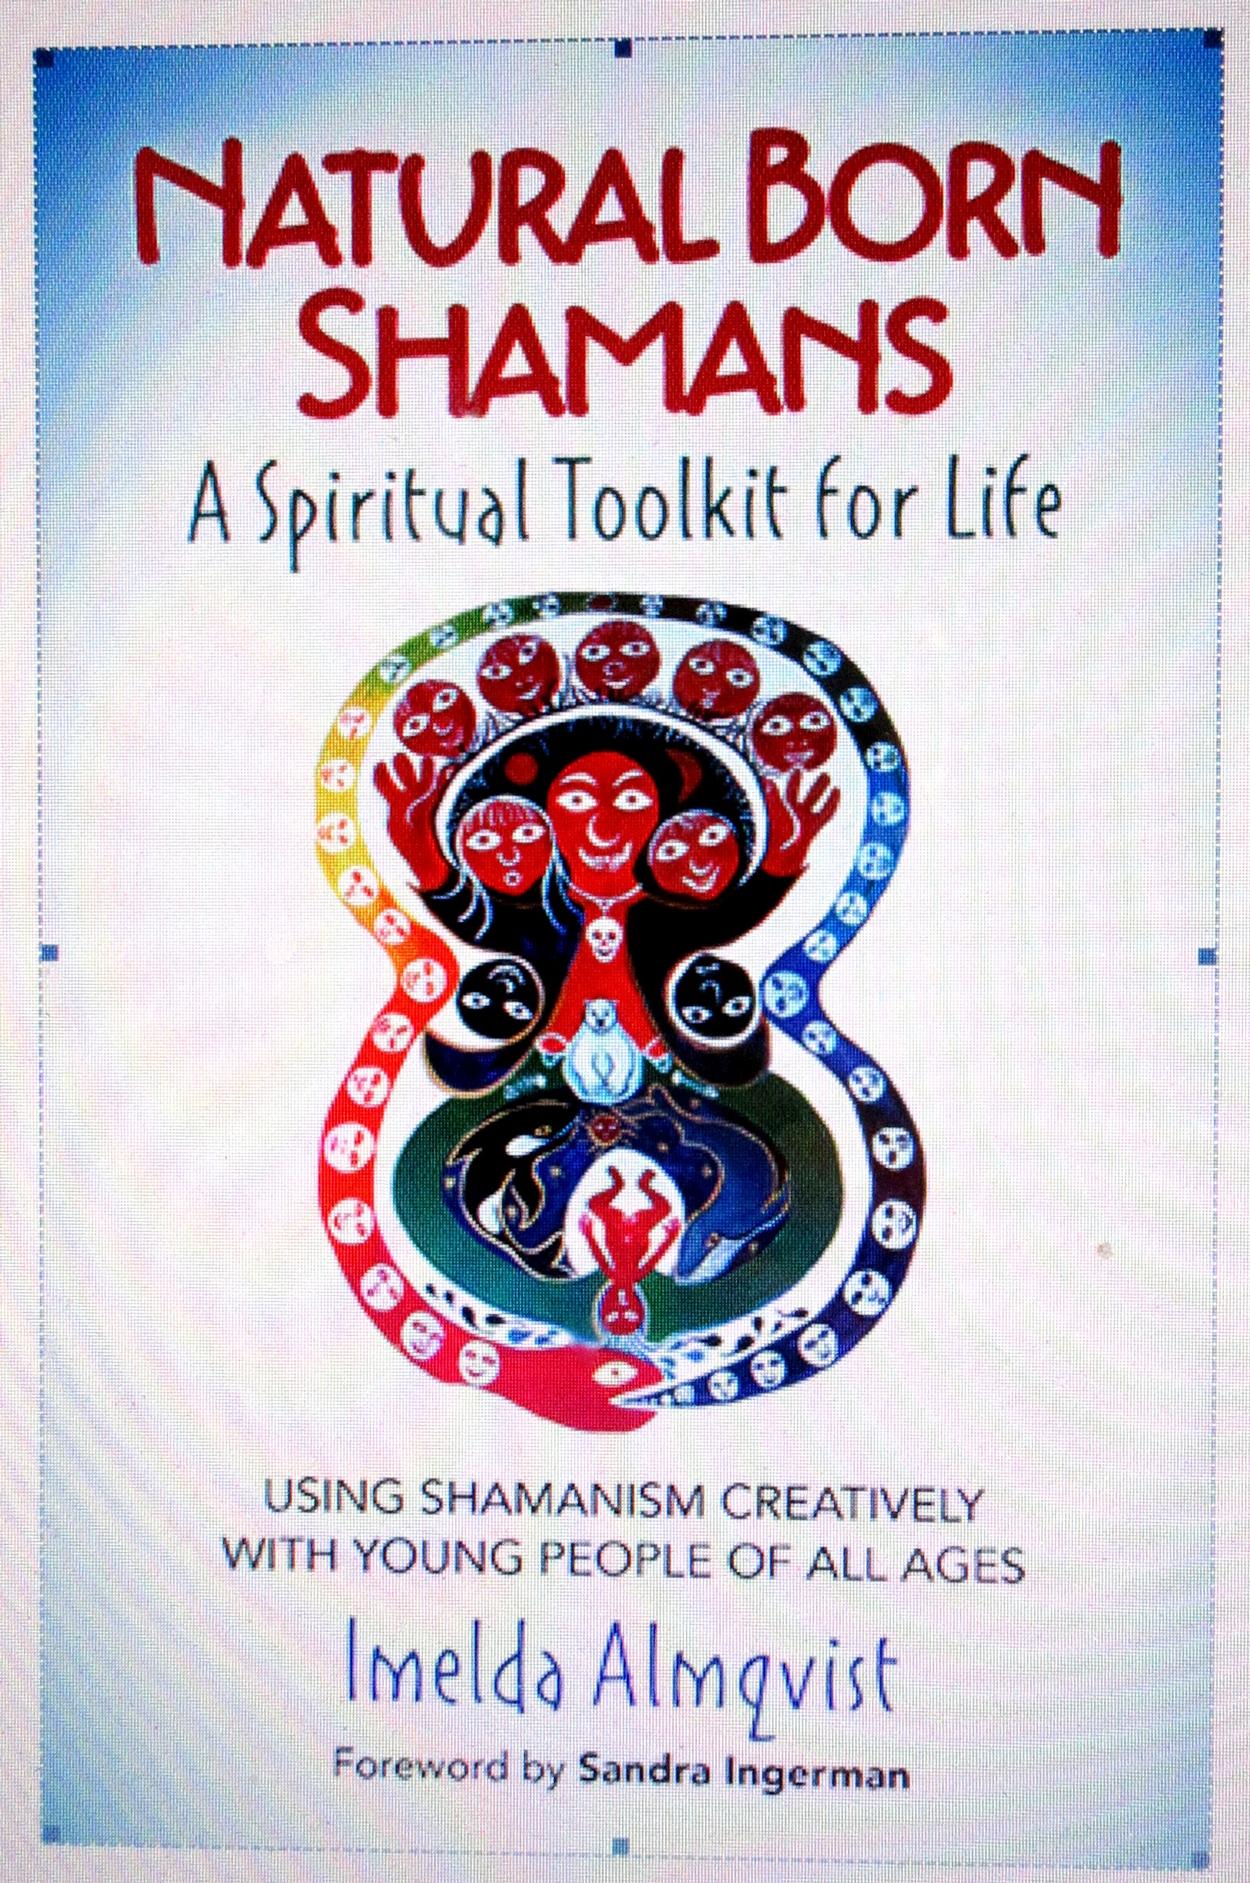 Courses in shamanism and sacred art offered by shamanic teacher painter and author Imelda Almqvist 